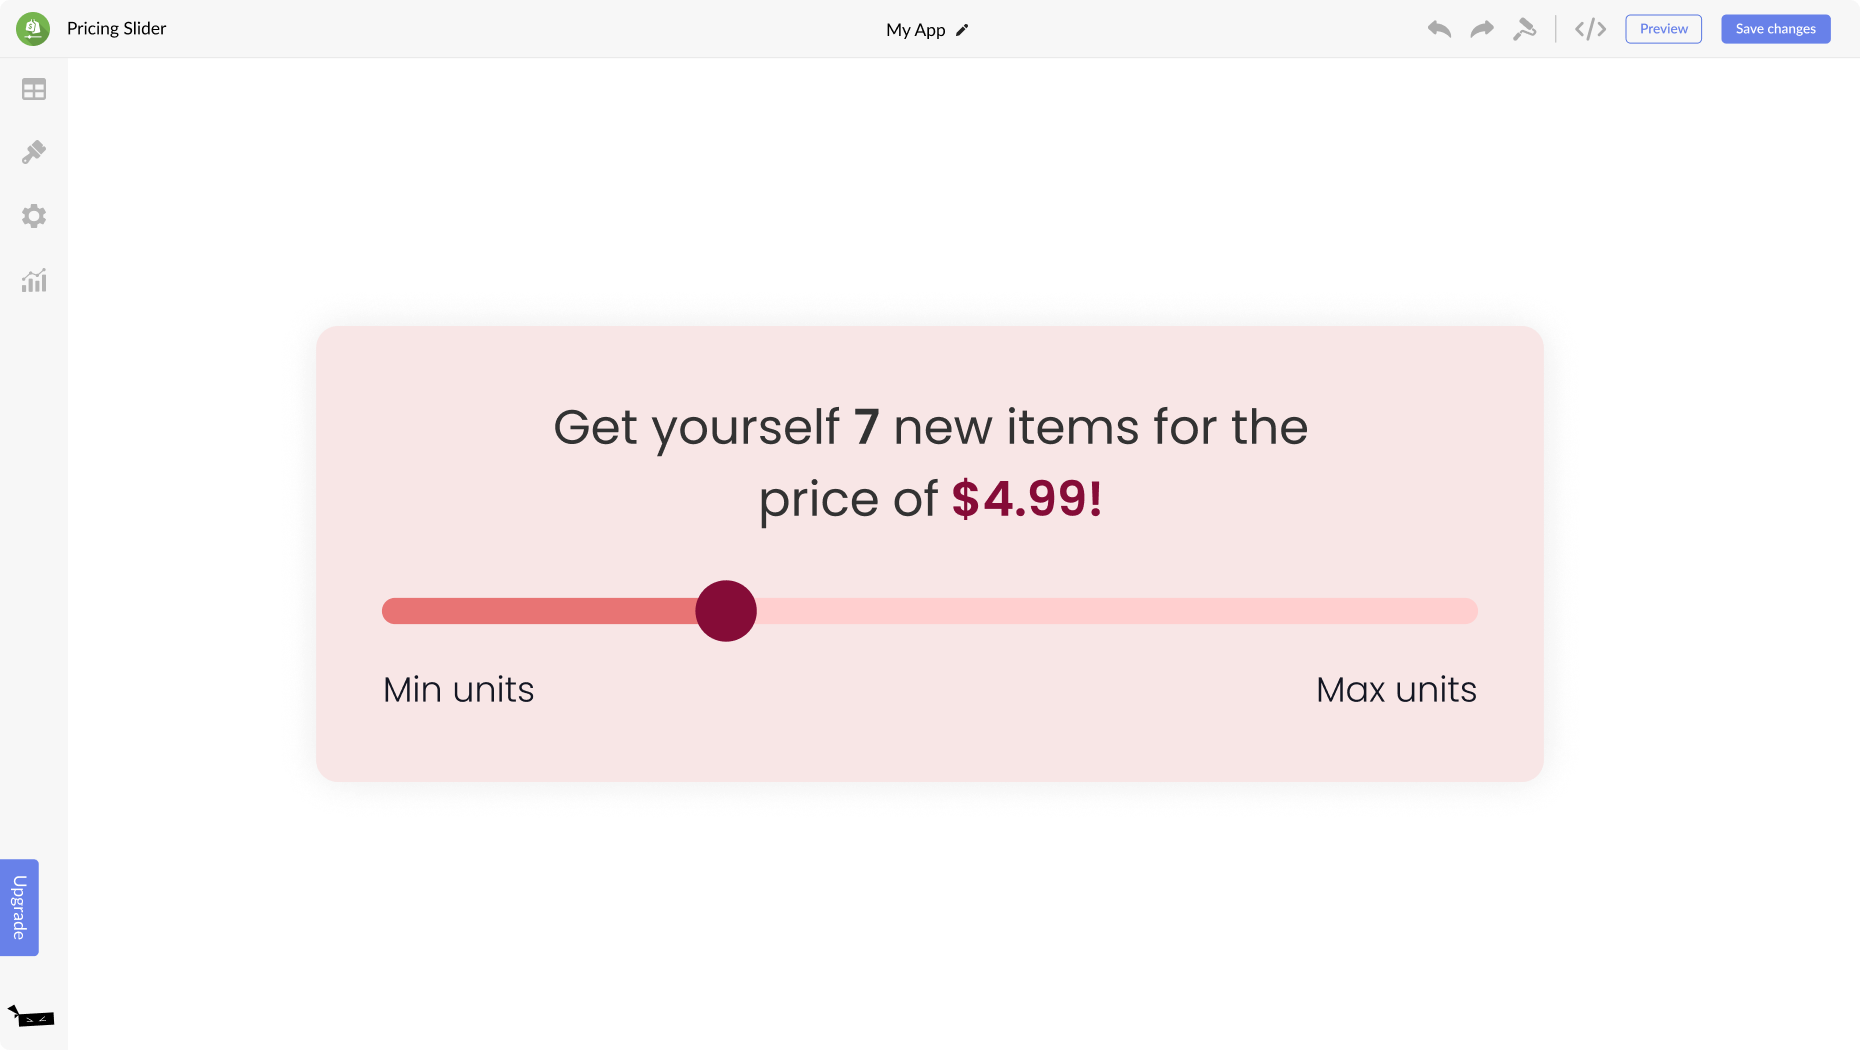 Pricing Slider for Uscreen